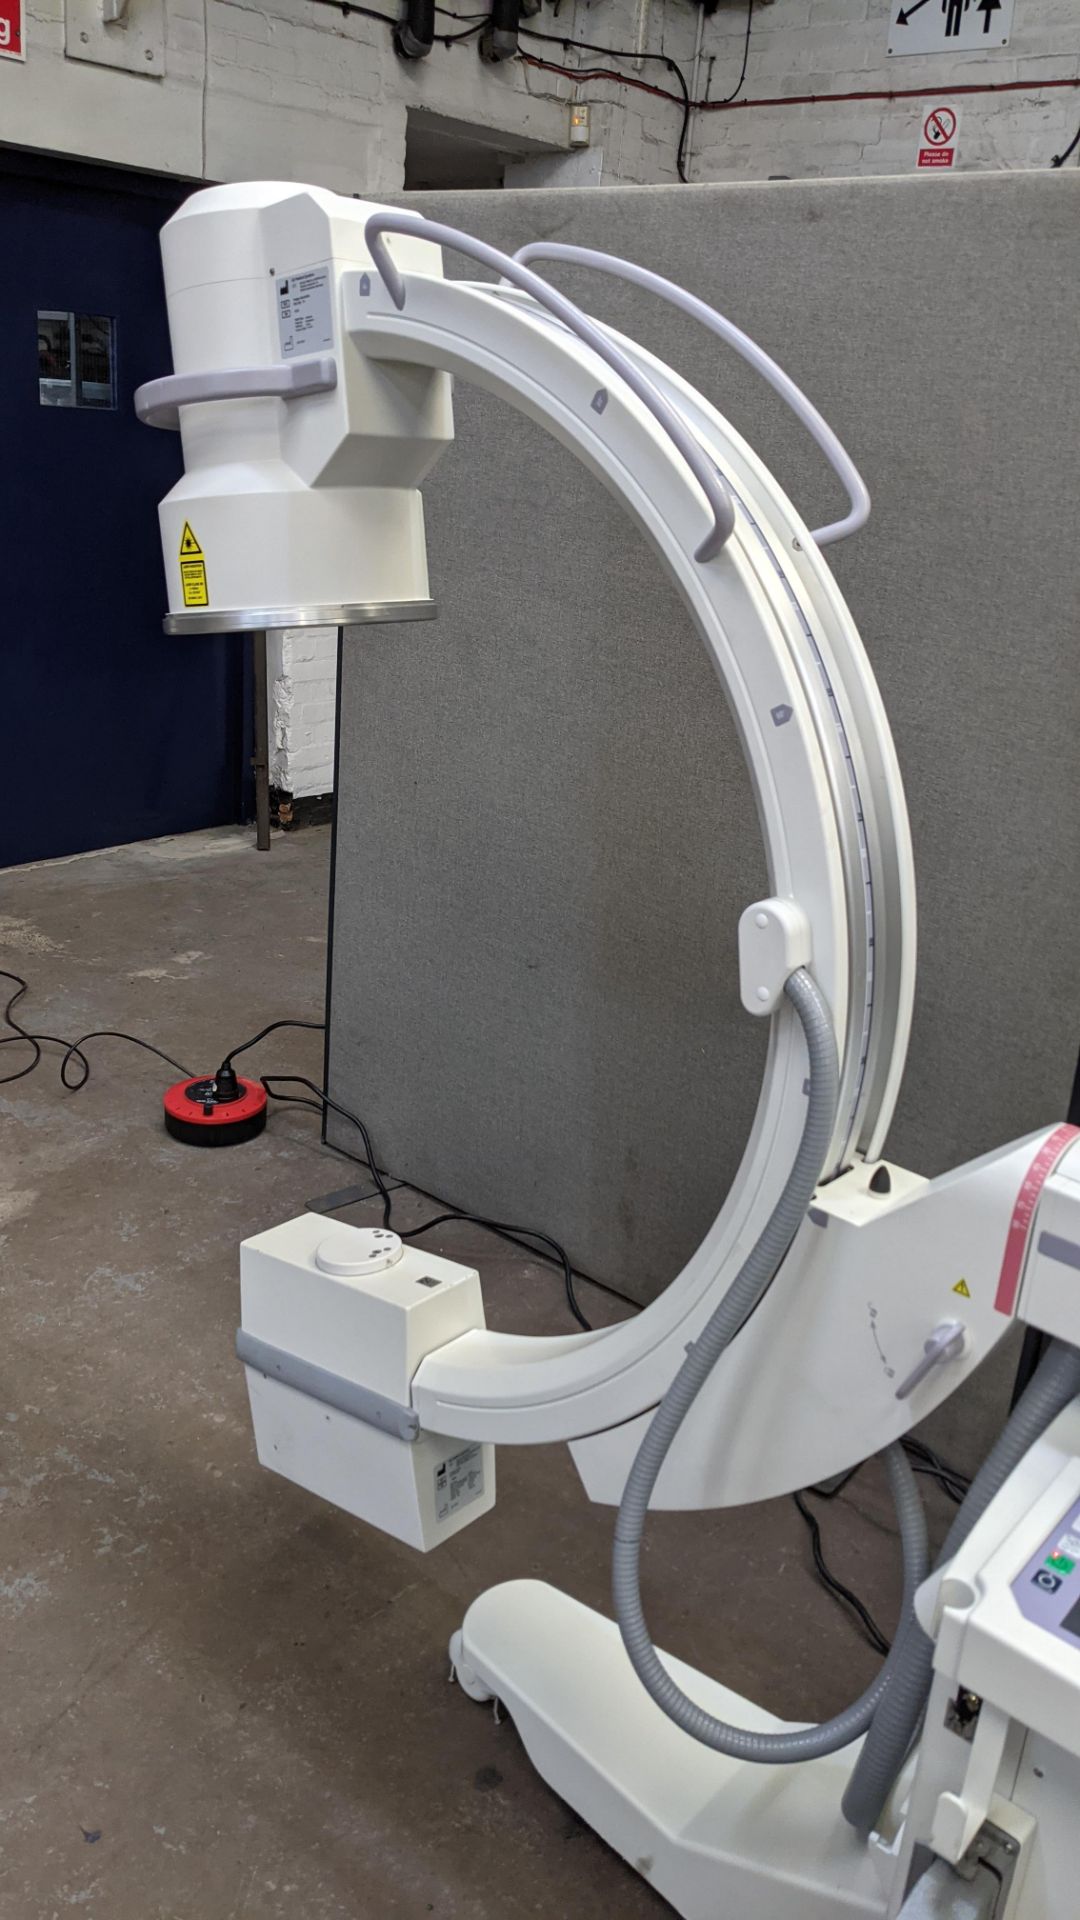 GE-OEC Fluorostar imaging system, purchased new in August 2017. EO4 Series. - Image 35 of 68